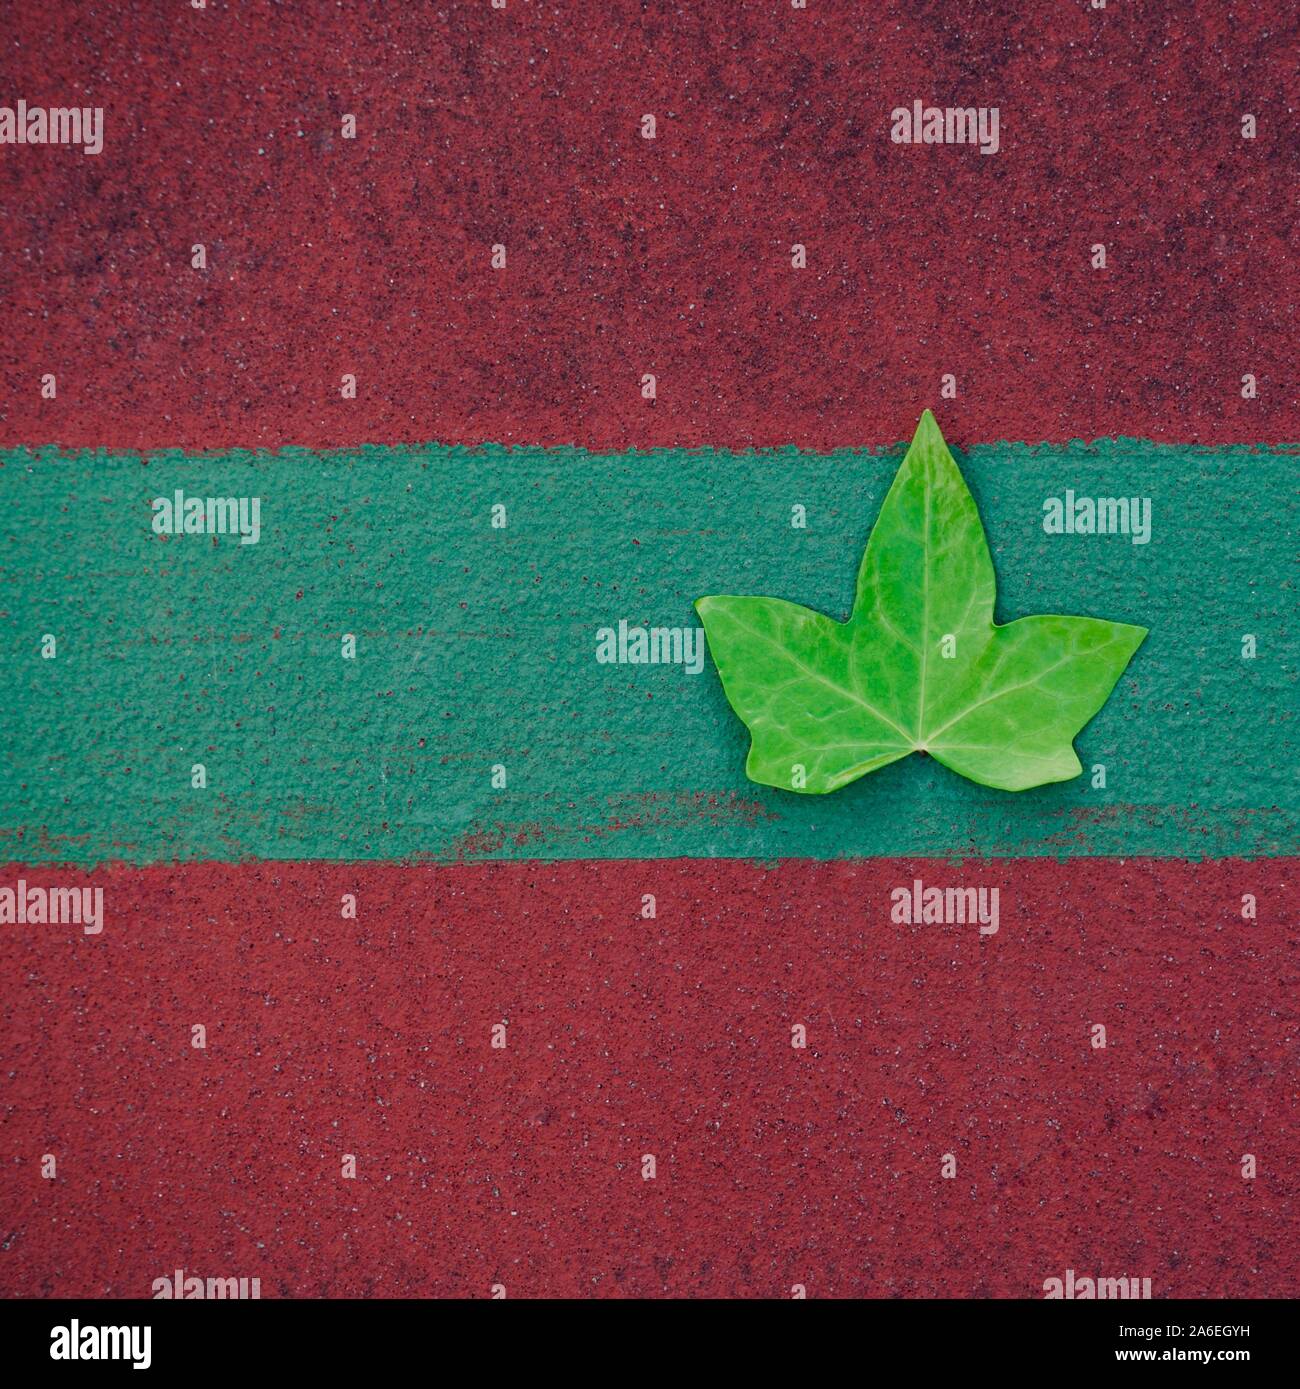 green tree leaf alone on the red ground Stock Photo